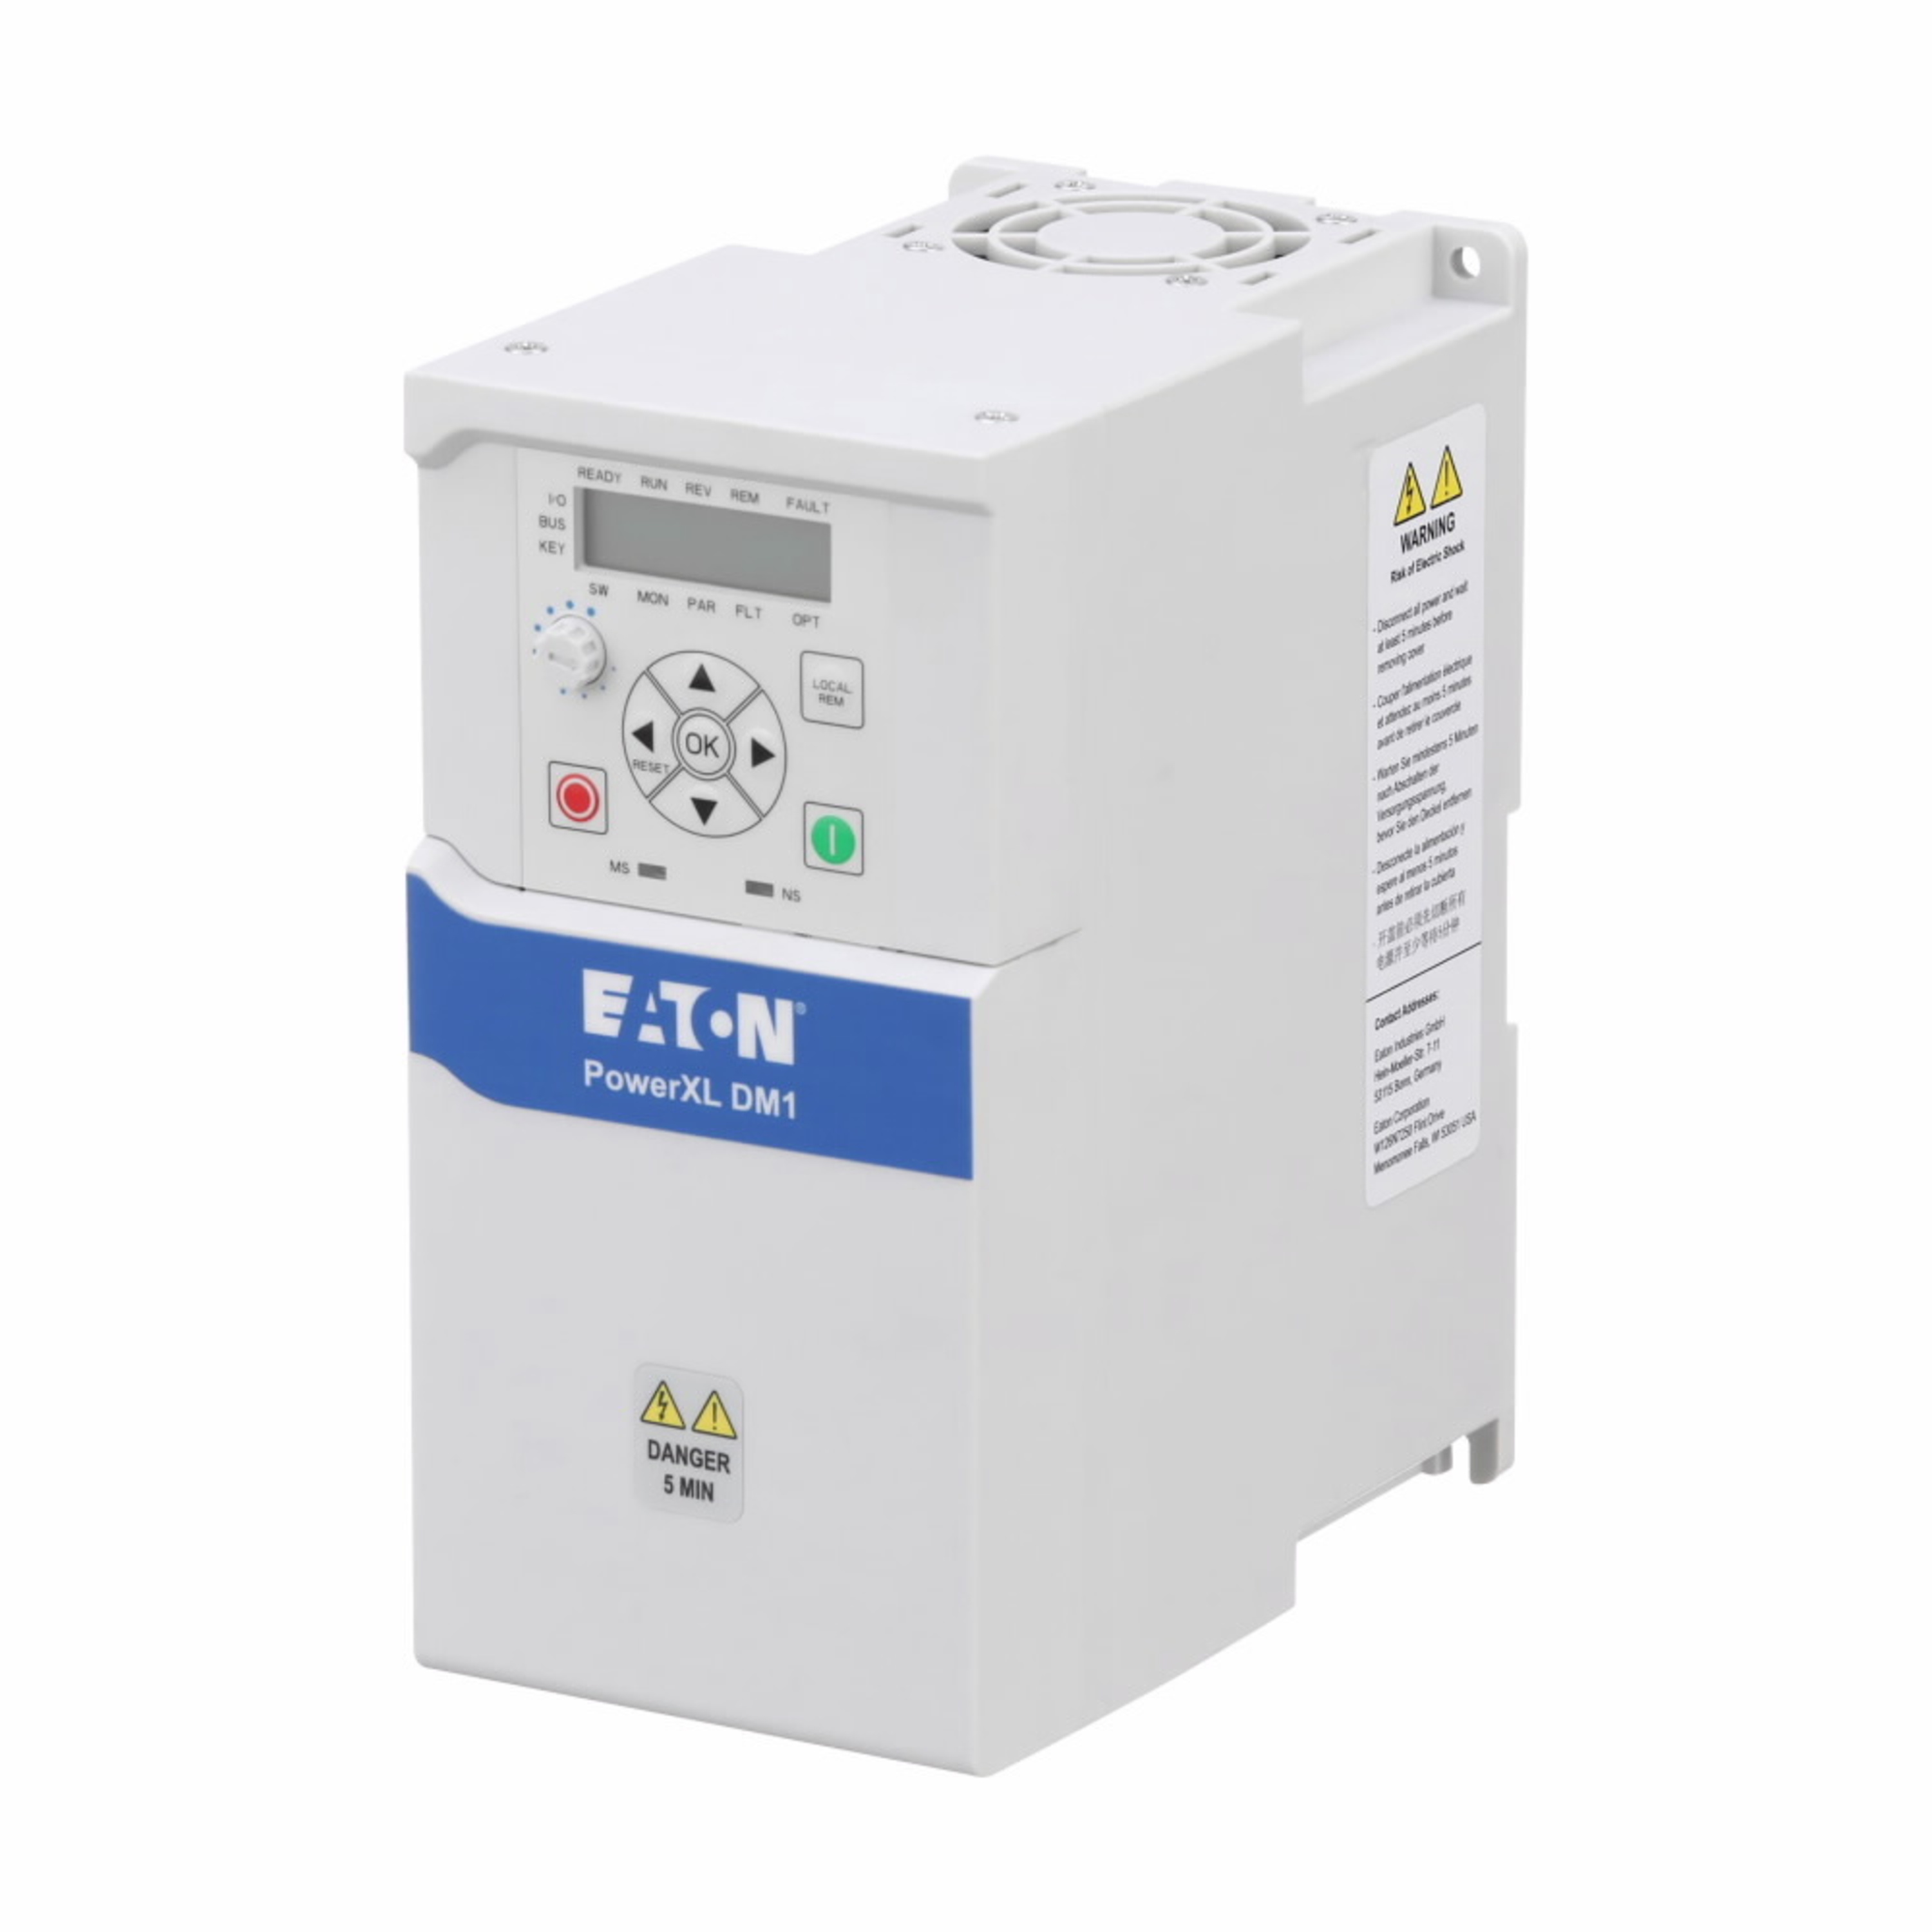 Eaton DM1-12017EB-S20S Eaton | Cutler Hammer DM1-12017EB-S20S  Variable Frequency Drives AC Drives – 240VAC – 1 Phase https://gesrepair.com/wp-content/uploads/2022/Eaton/Images/Eaton_DM1-12017EB-S20S_Variable_Frequency_Drive.jpg